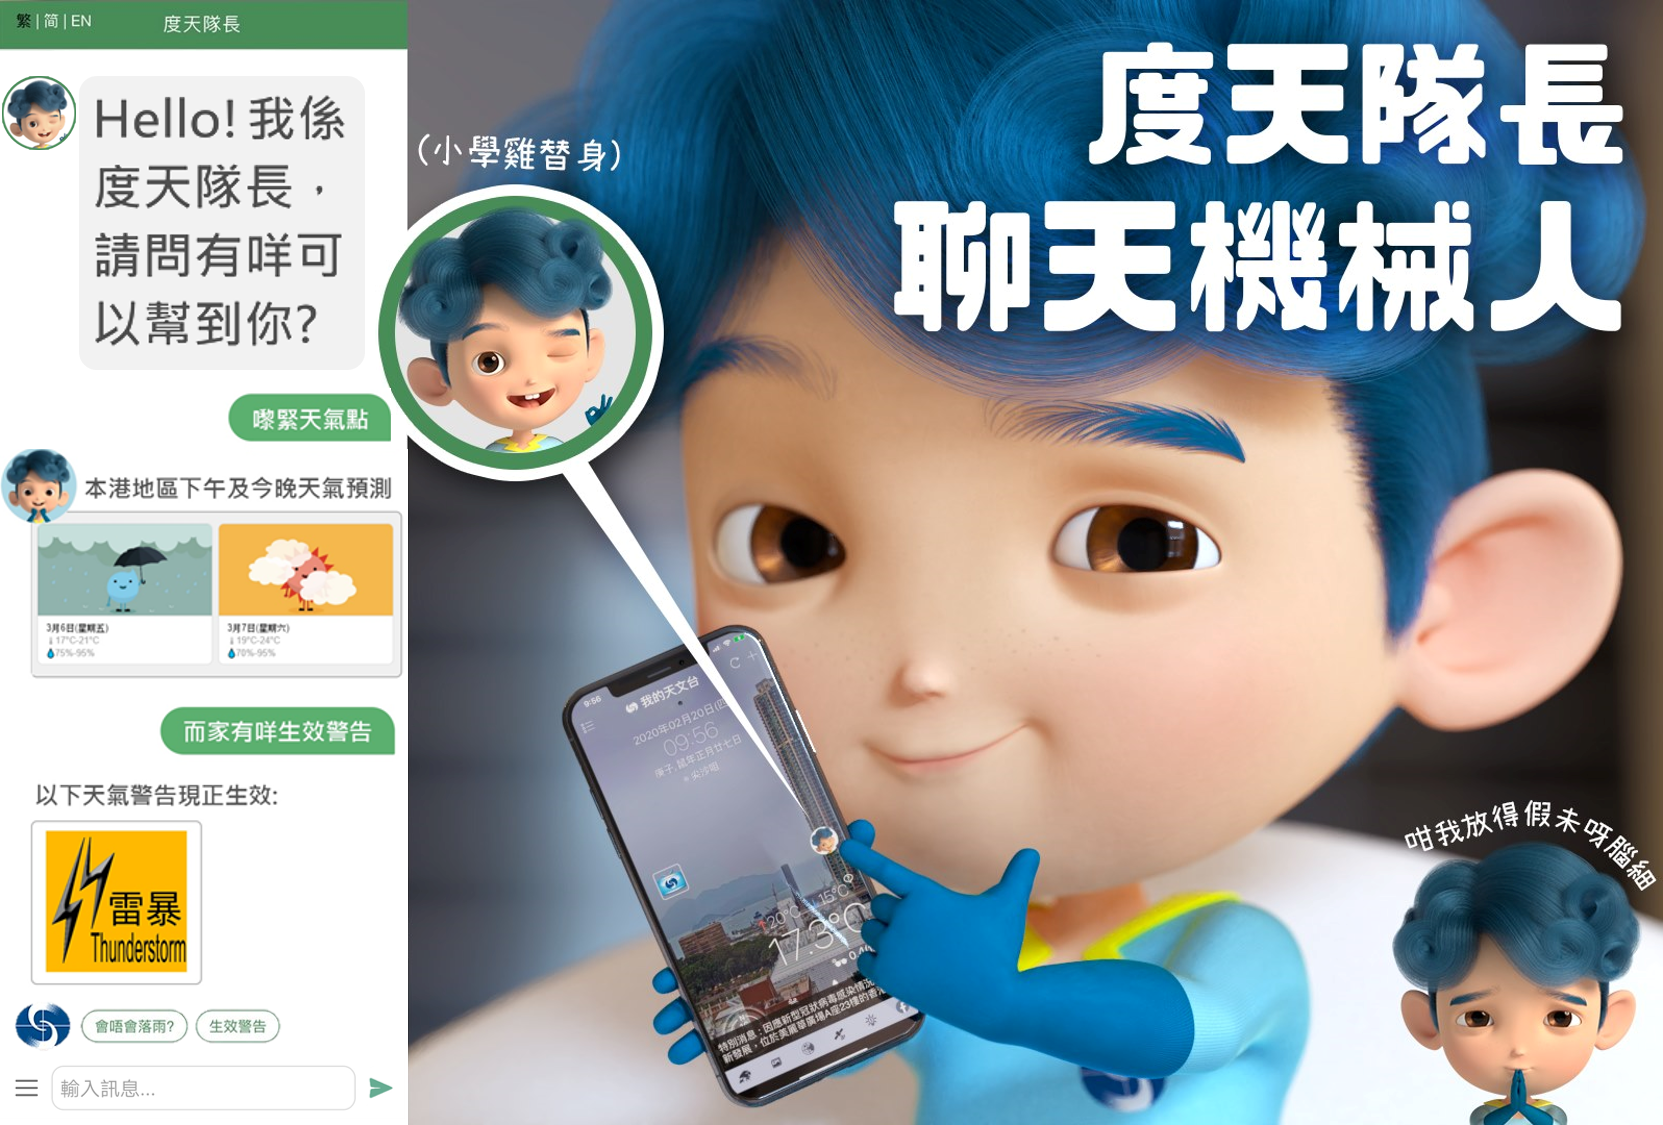 Welcome "Dr Tin" Chatbot!